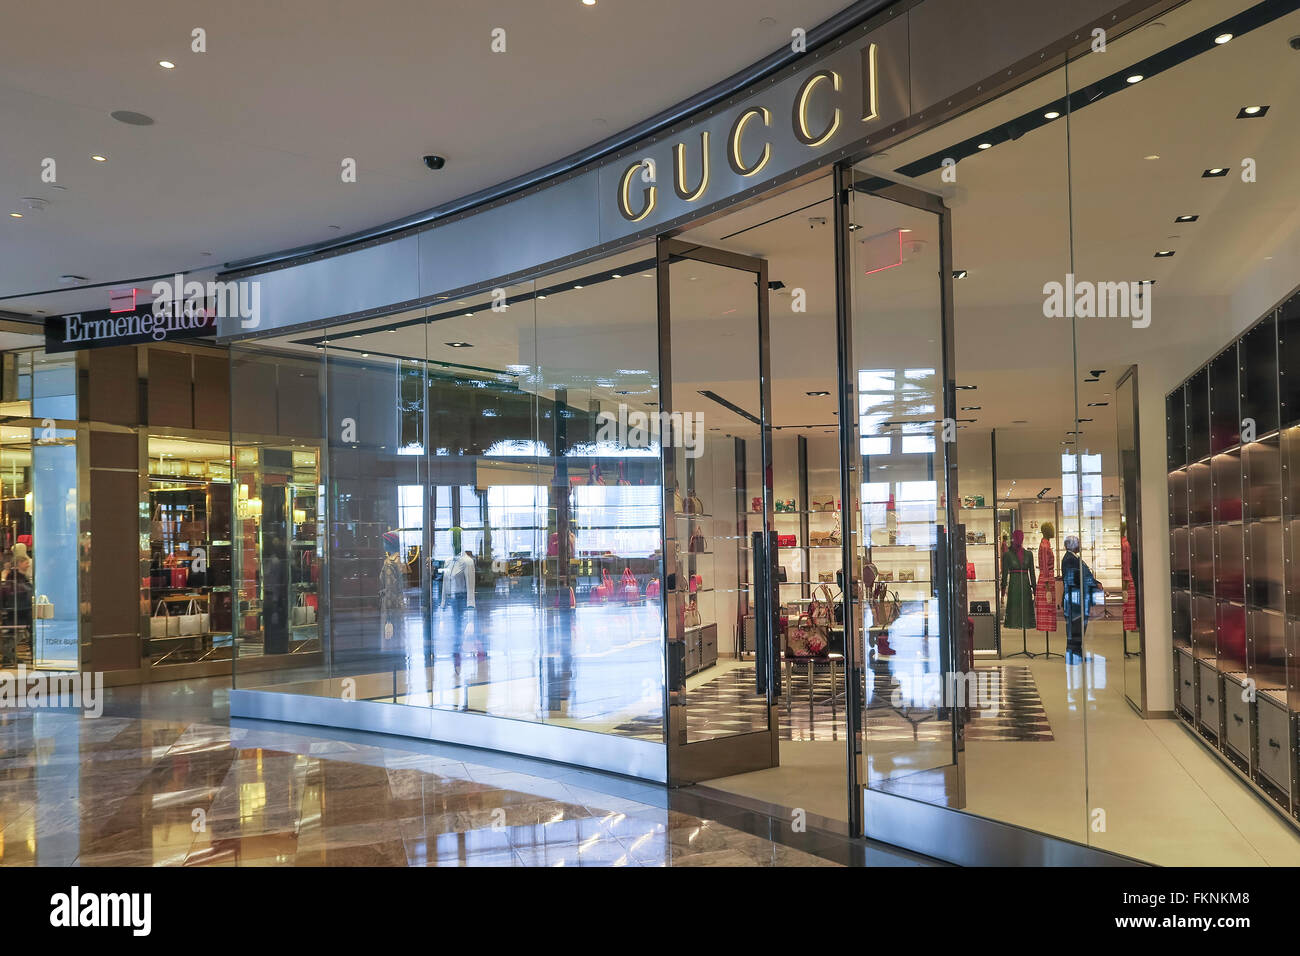 Gucci Store, Place in Battery City, NYC, Stock Photo - Alamy